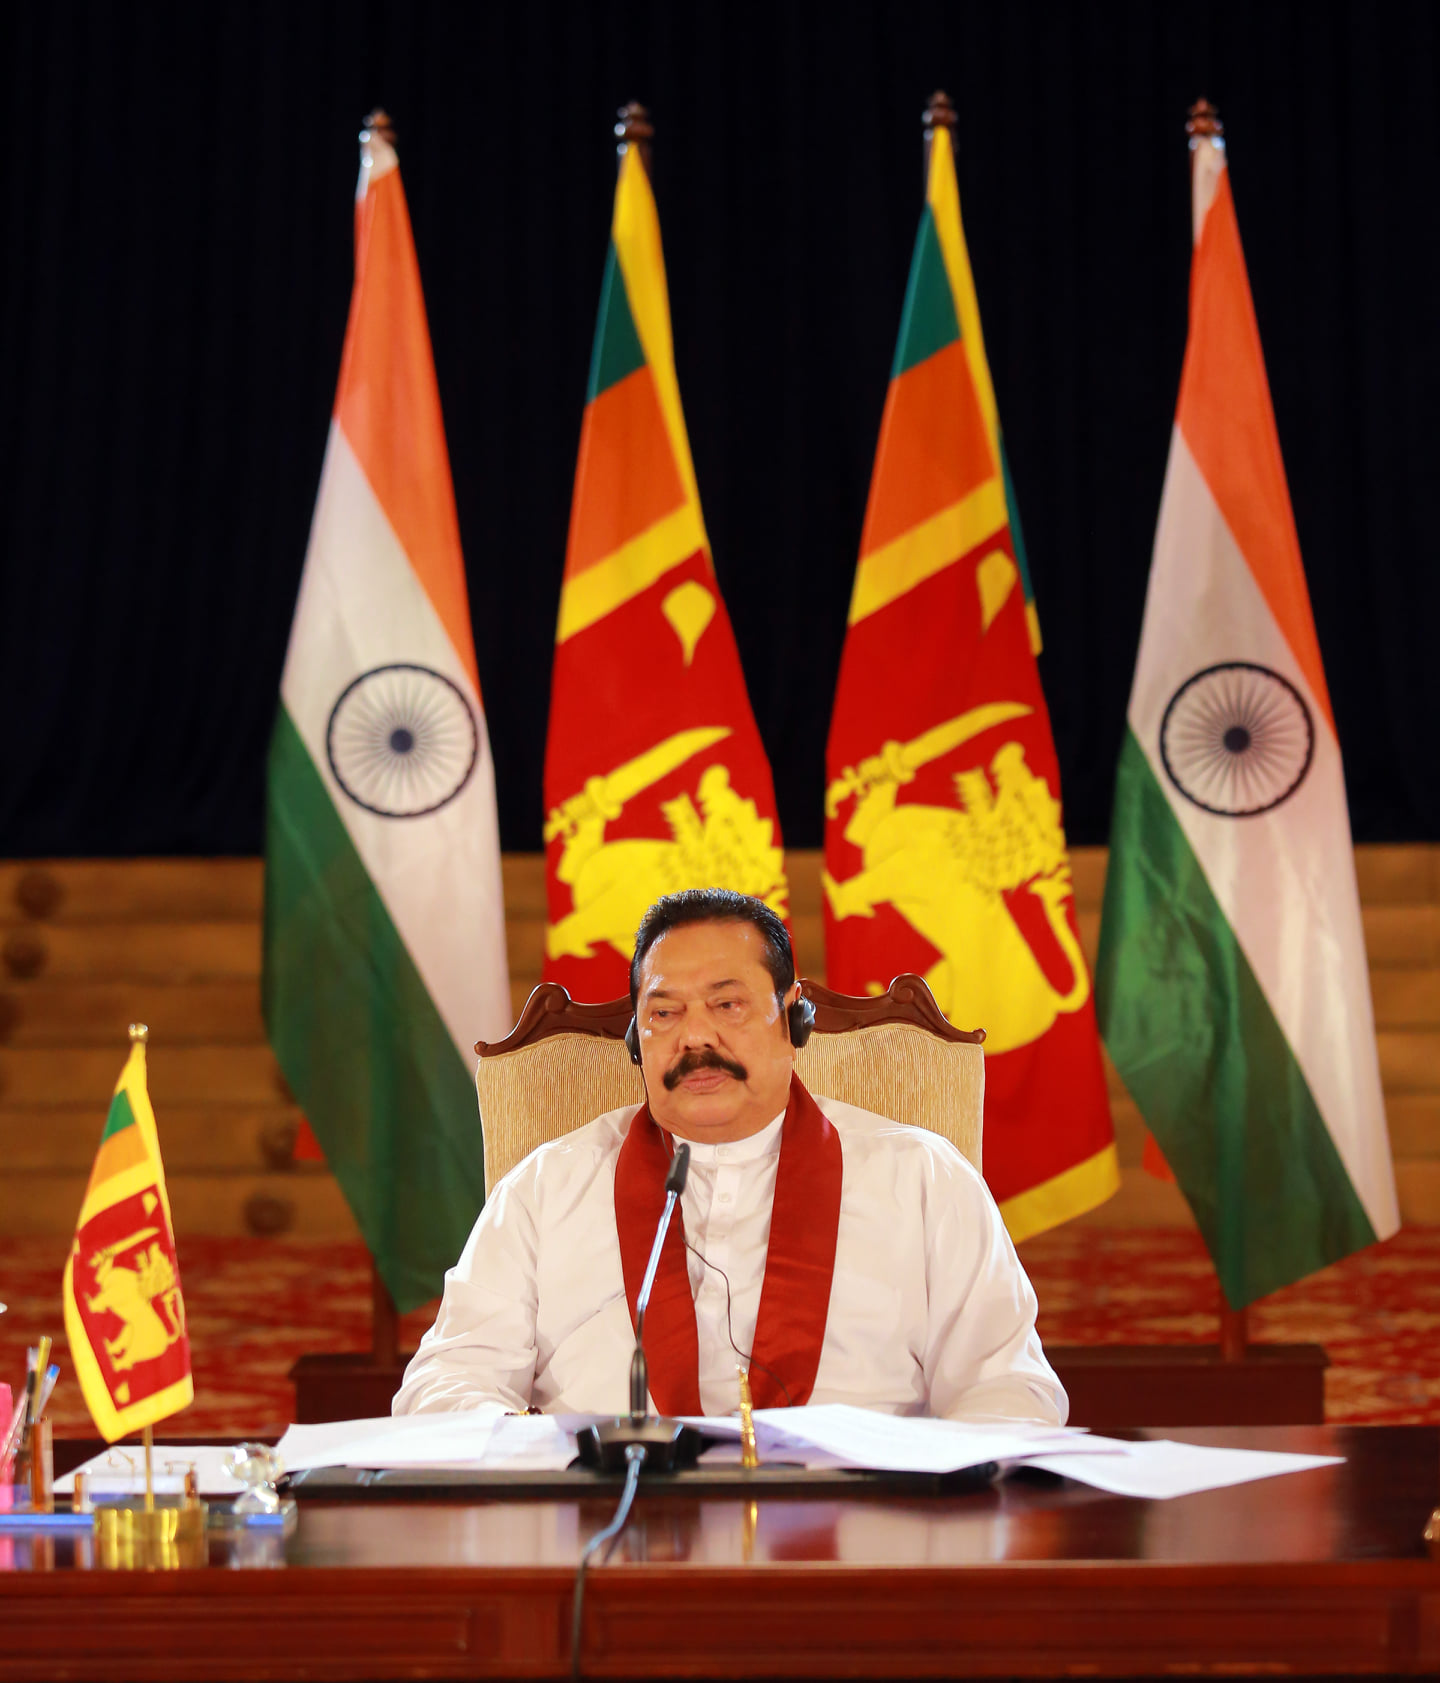 Virtual Bilateral Summit between Prime Minister of Sri Lanka and Prime Minister of India